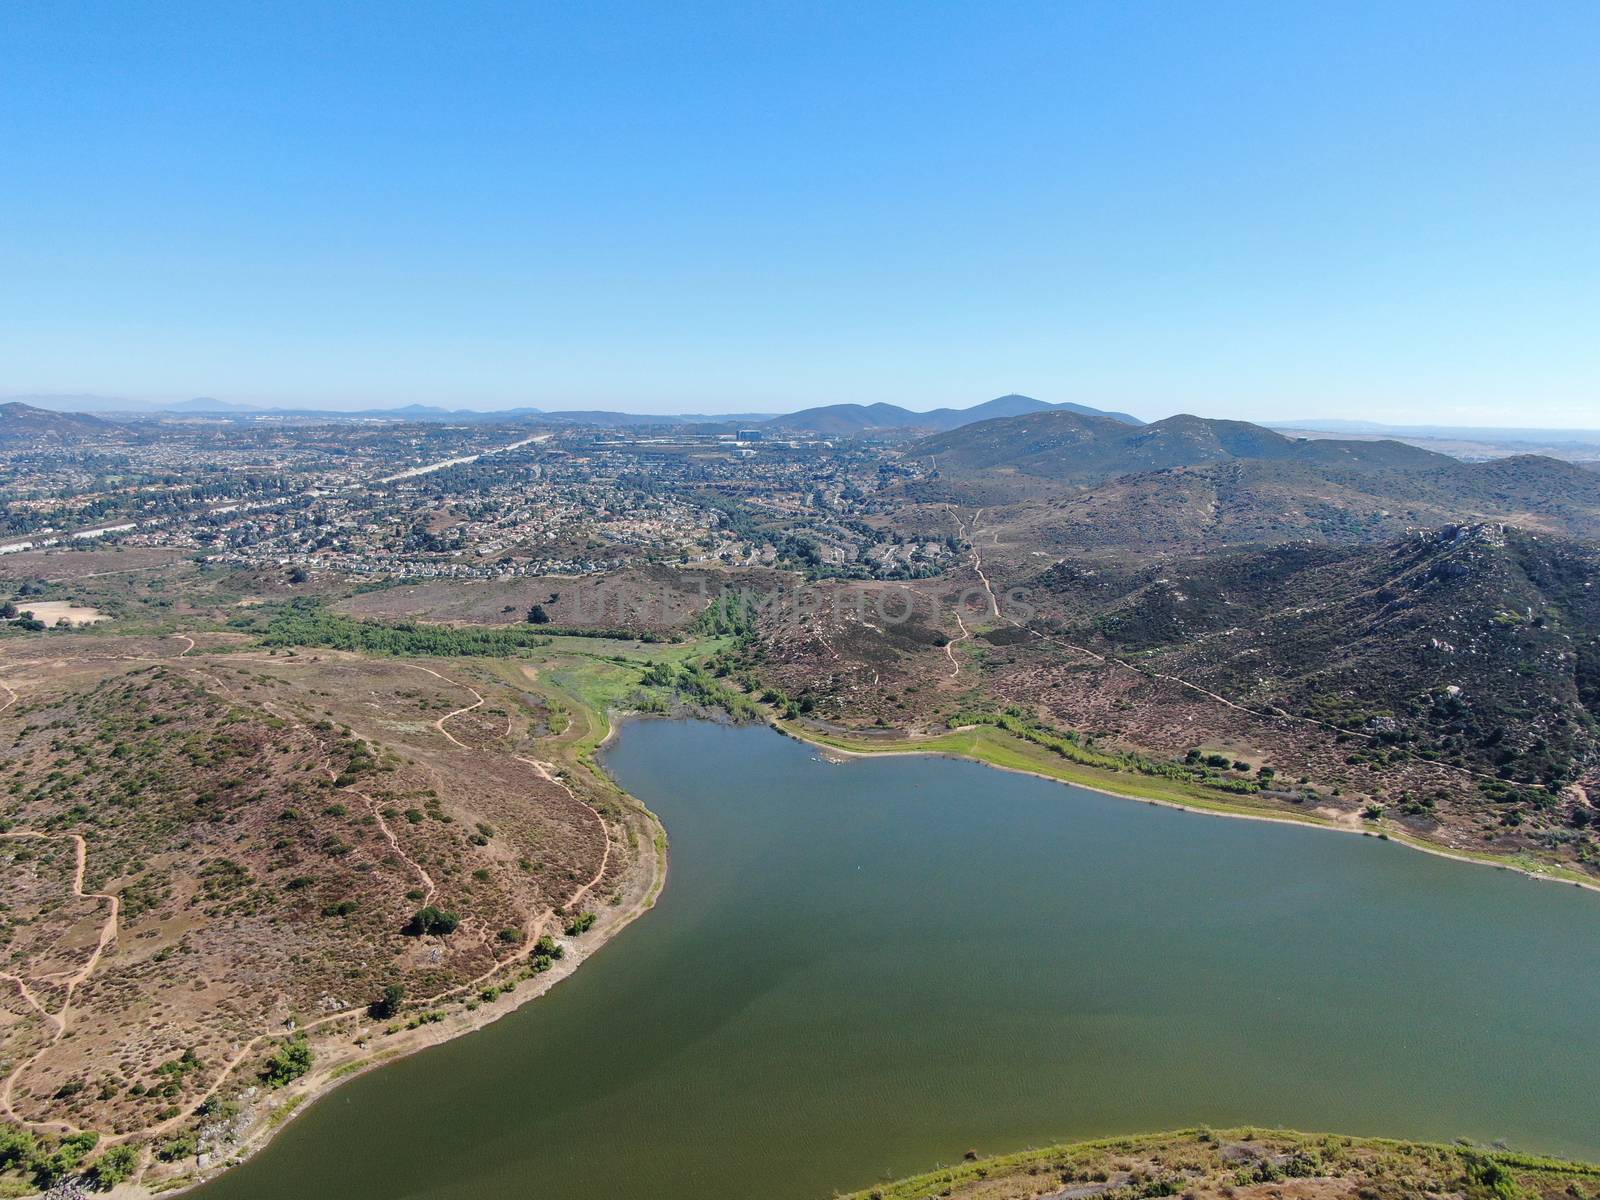 Aerial view of Inland Lake Hodges and Bernardo Mountain, great hiking trail and water activity in Rancho Bernardo East San Diego County, California, USA 